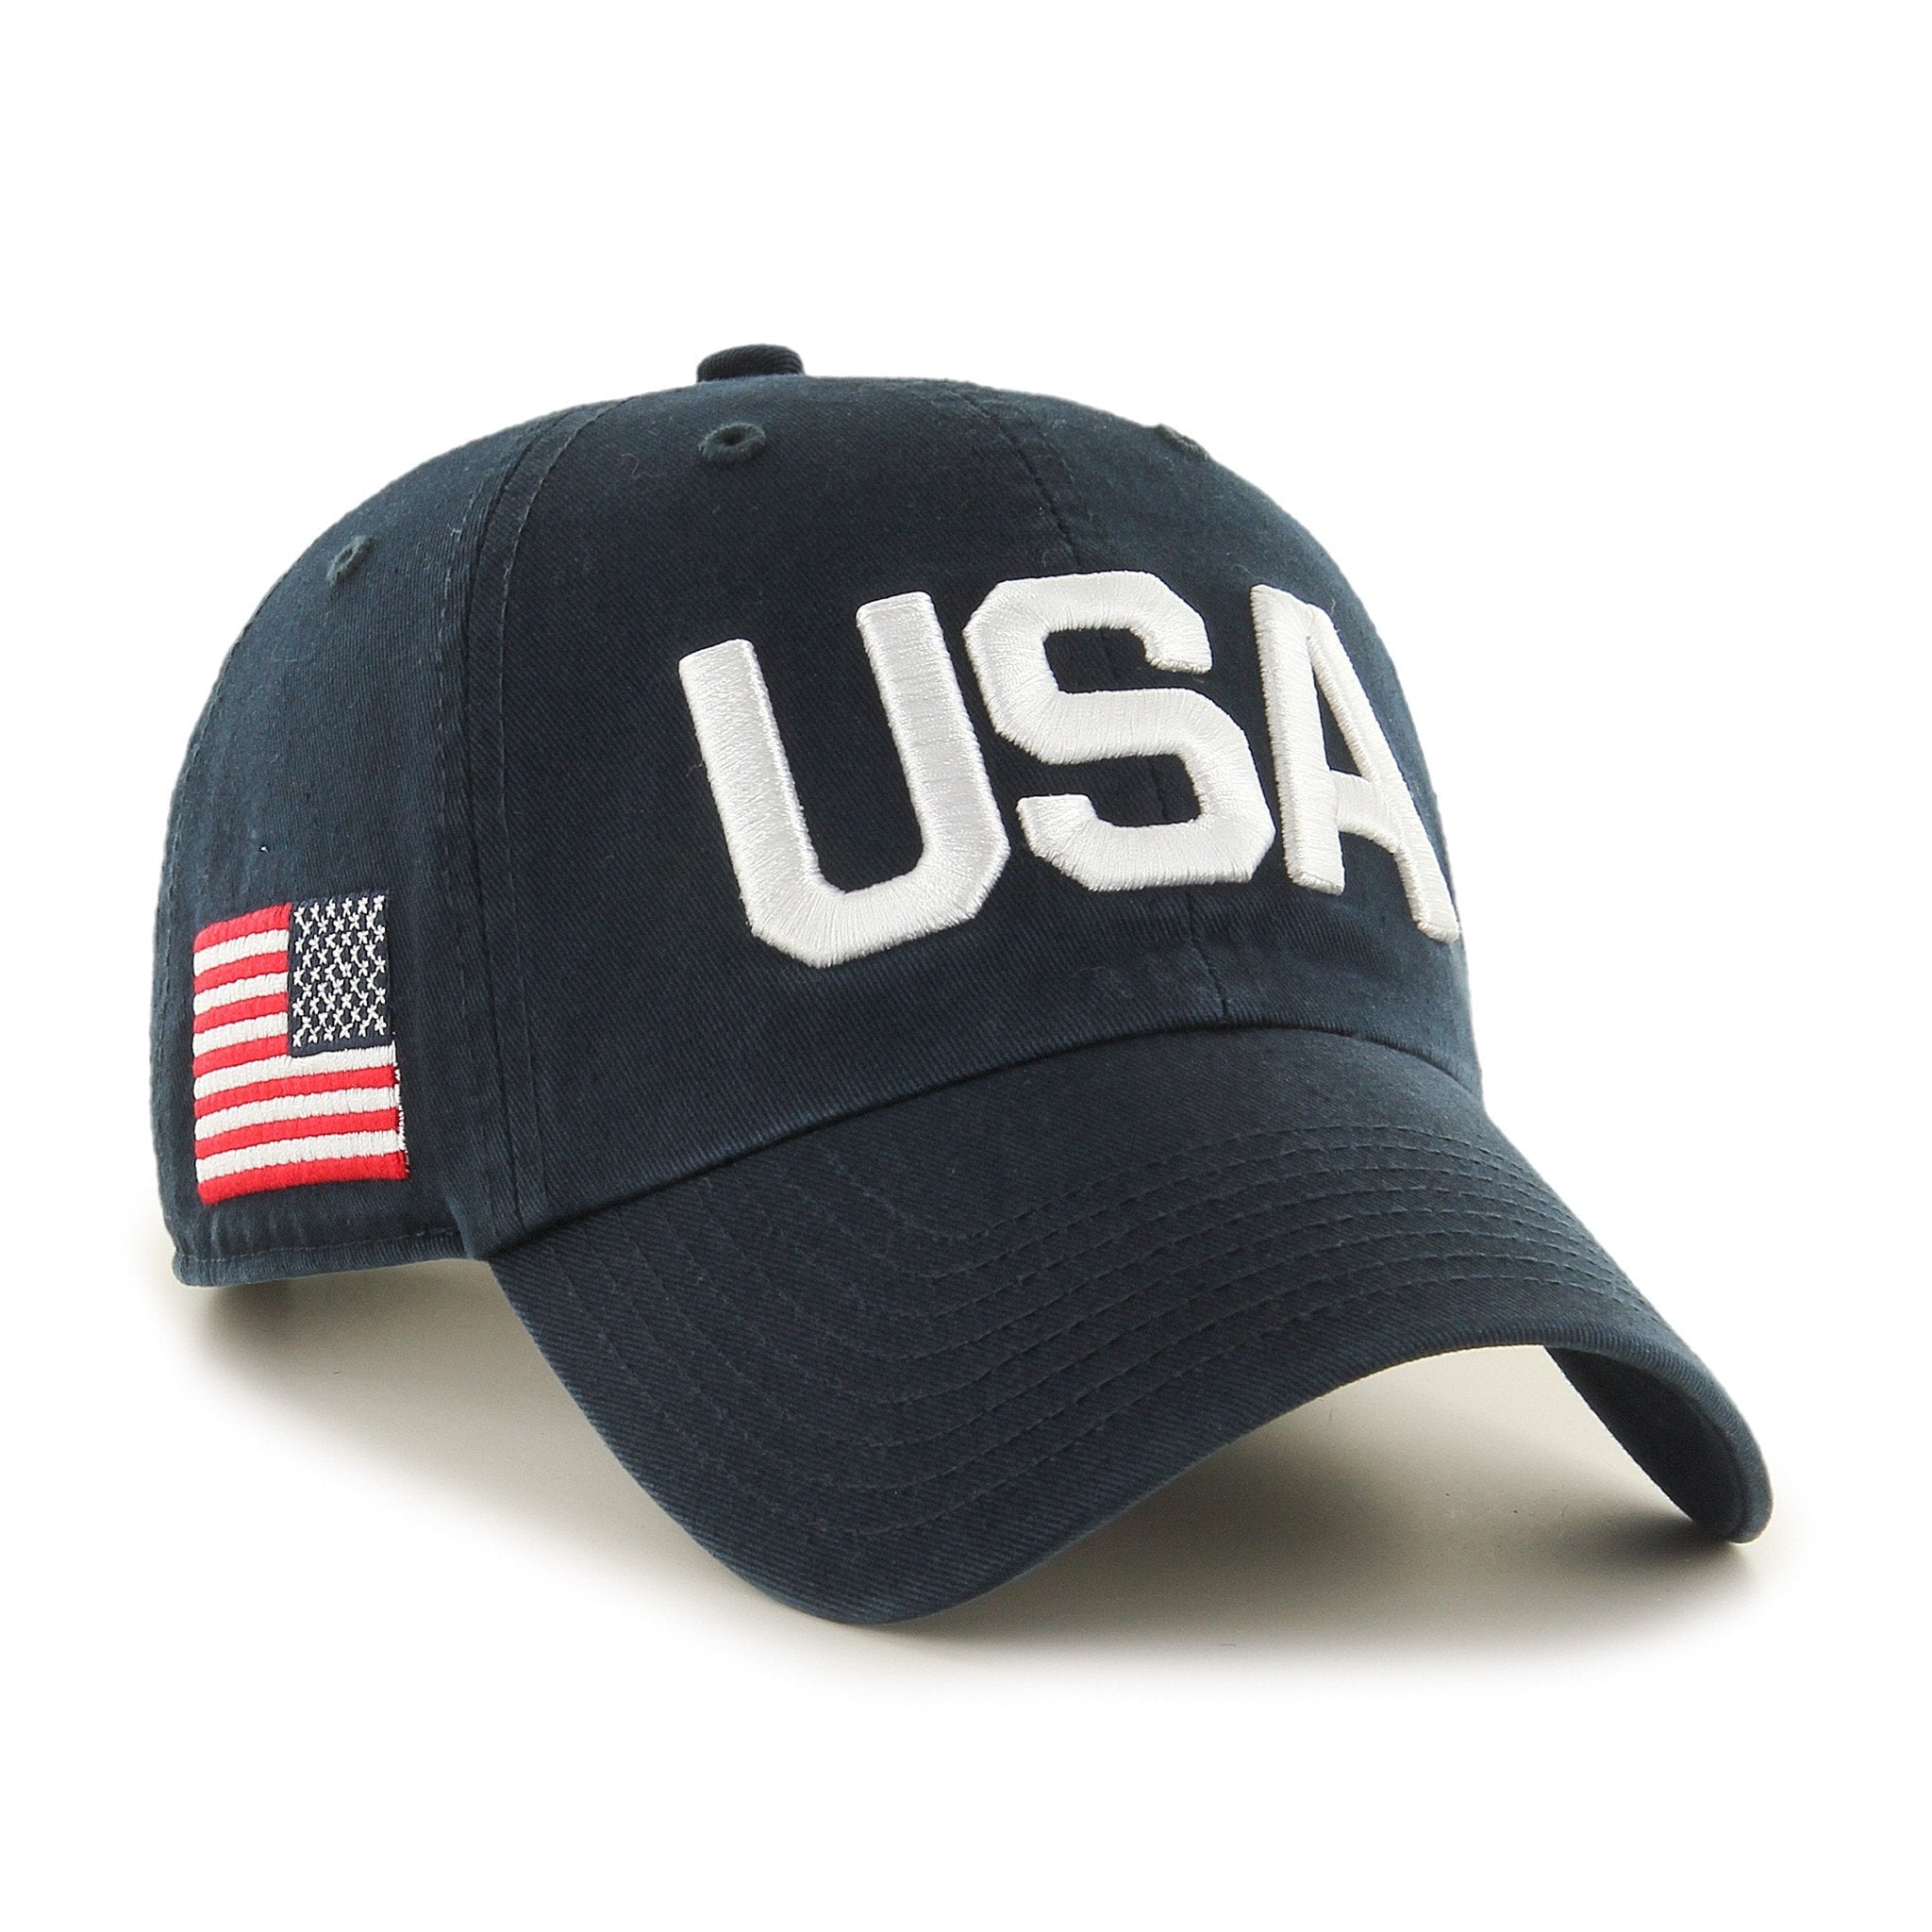 UNITED STATES USA '47 CLEAN UP | ‘47 – Sports lifestyle brand ...